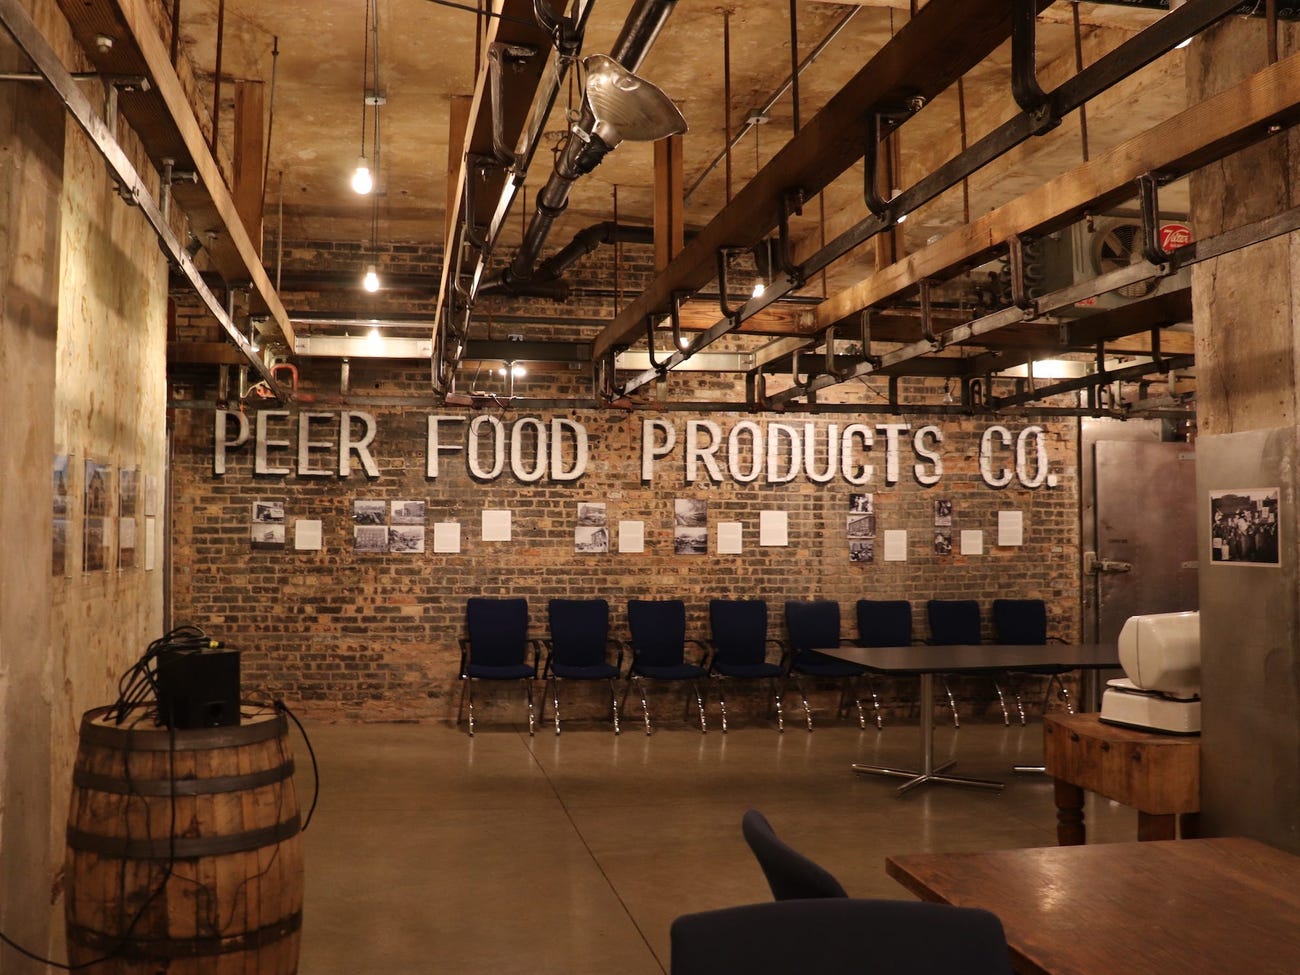 large room with "peer food products co" in white letters on a brick wall with chairs lined up below and old meat railings on the ceiling